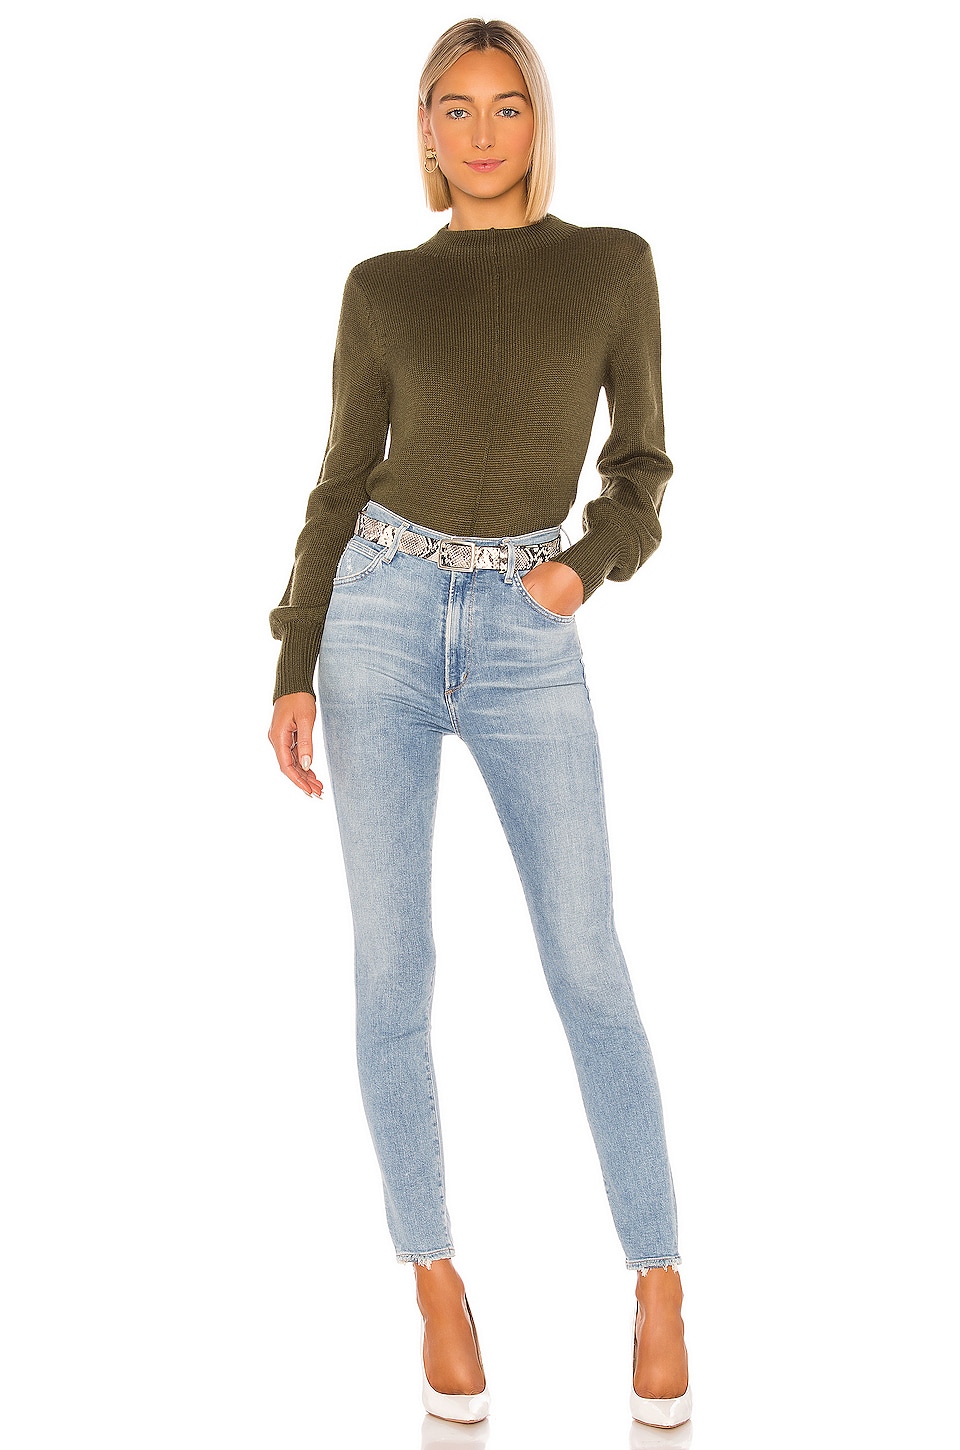 Citizens of Humanity Chrissy Sculpt High Rise Skinny in Islands | REVOLVE